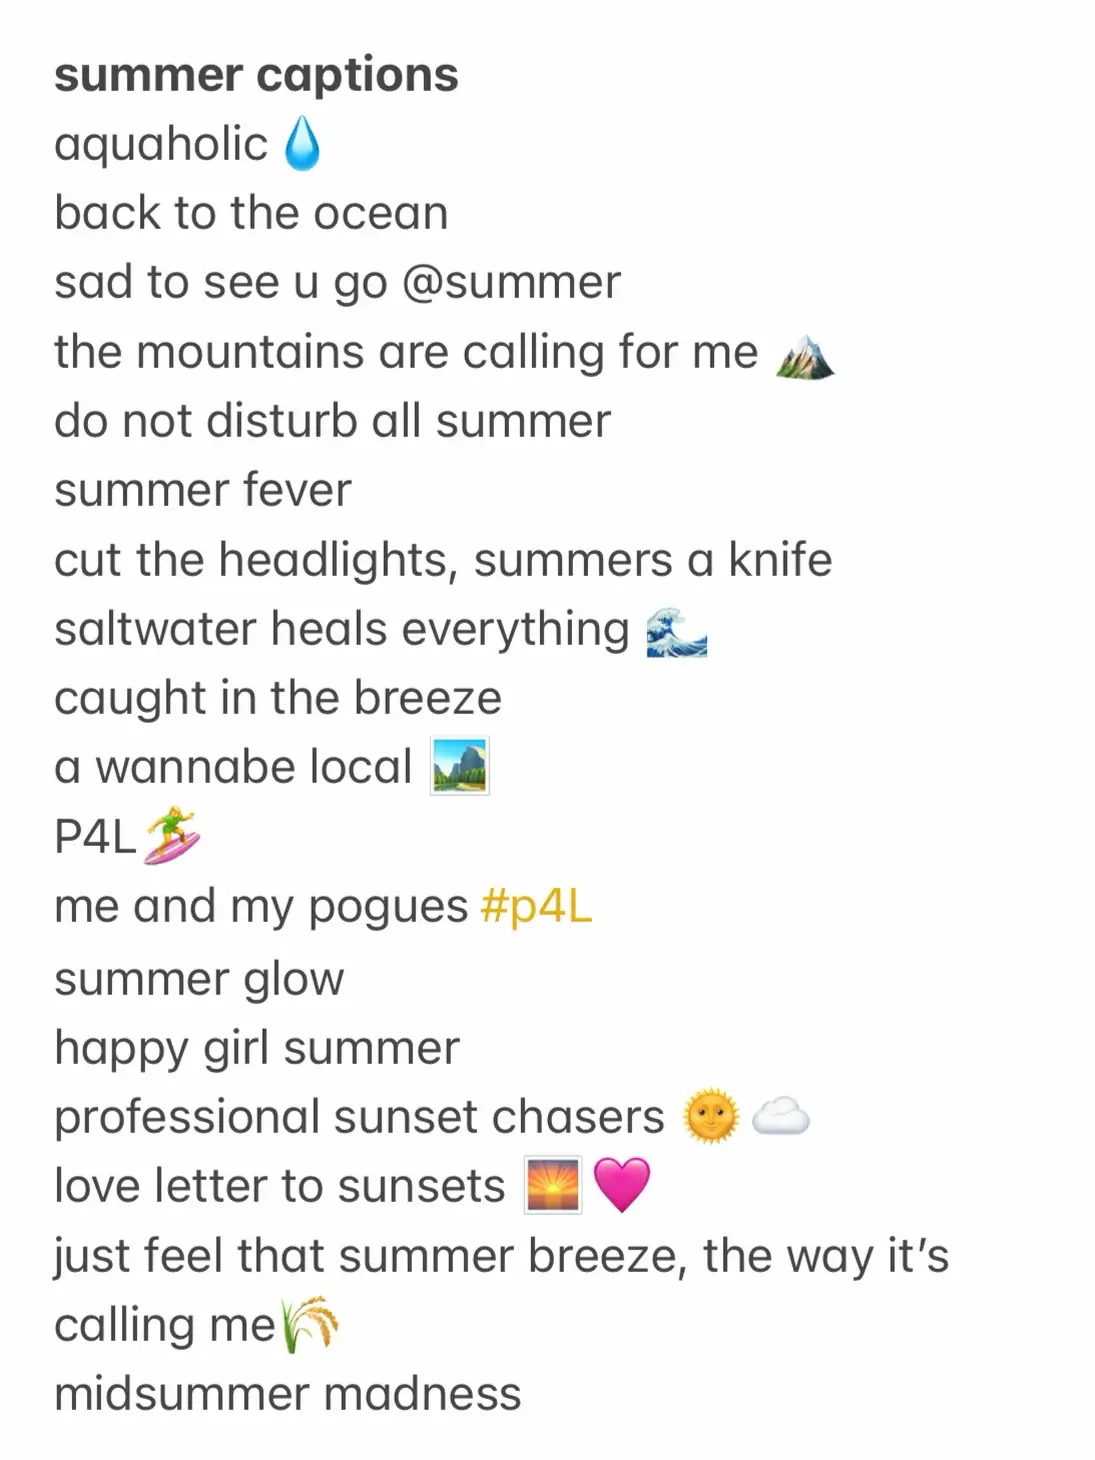  A list of summer captions with a picture of the ocean and a mountain.